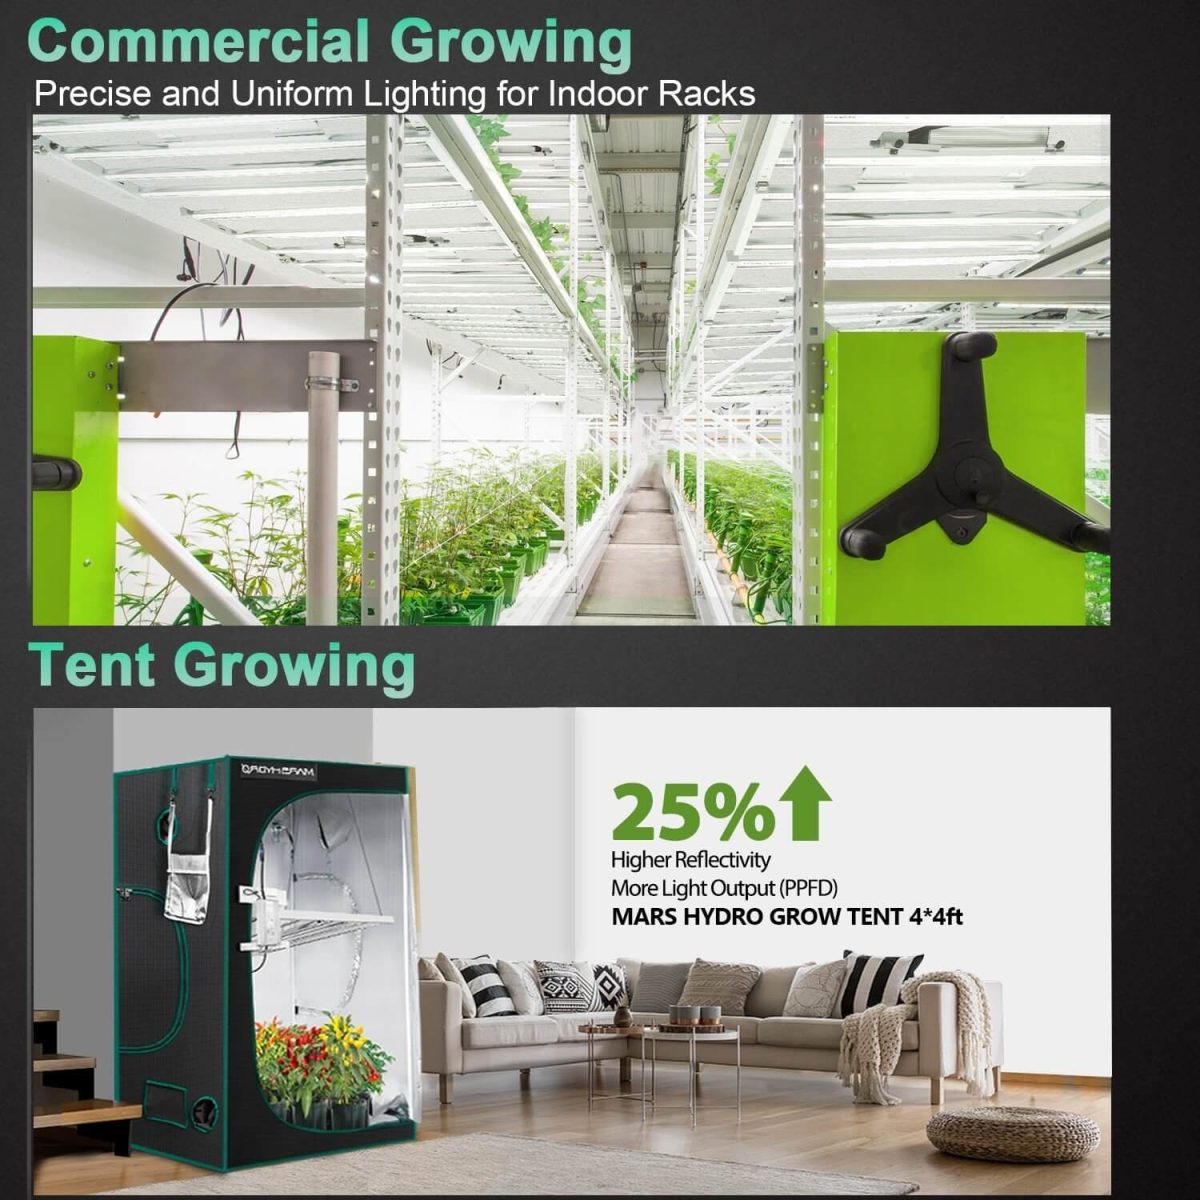 Mars Hydro FC4800 could be applied to commercial indoor projects, and indoor tent grow.